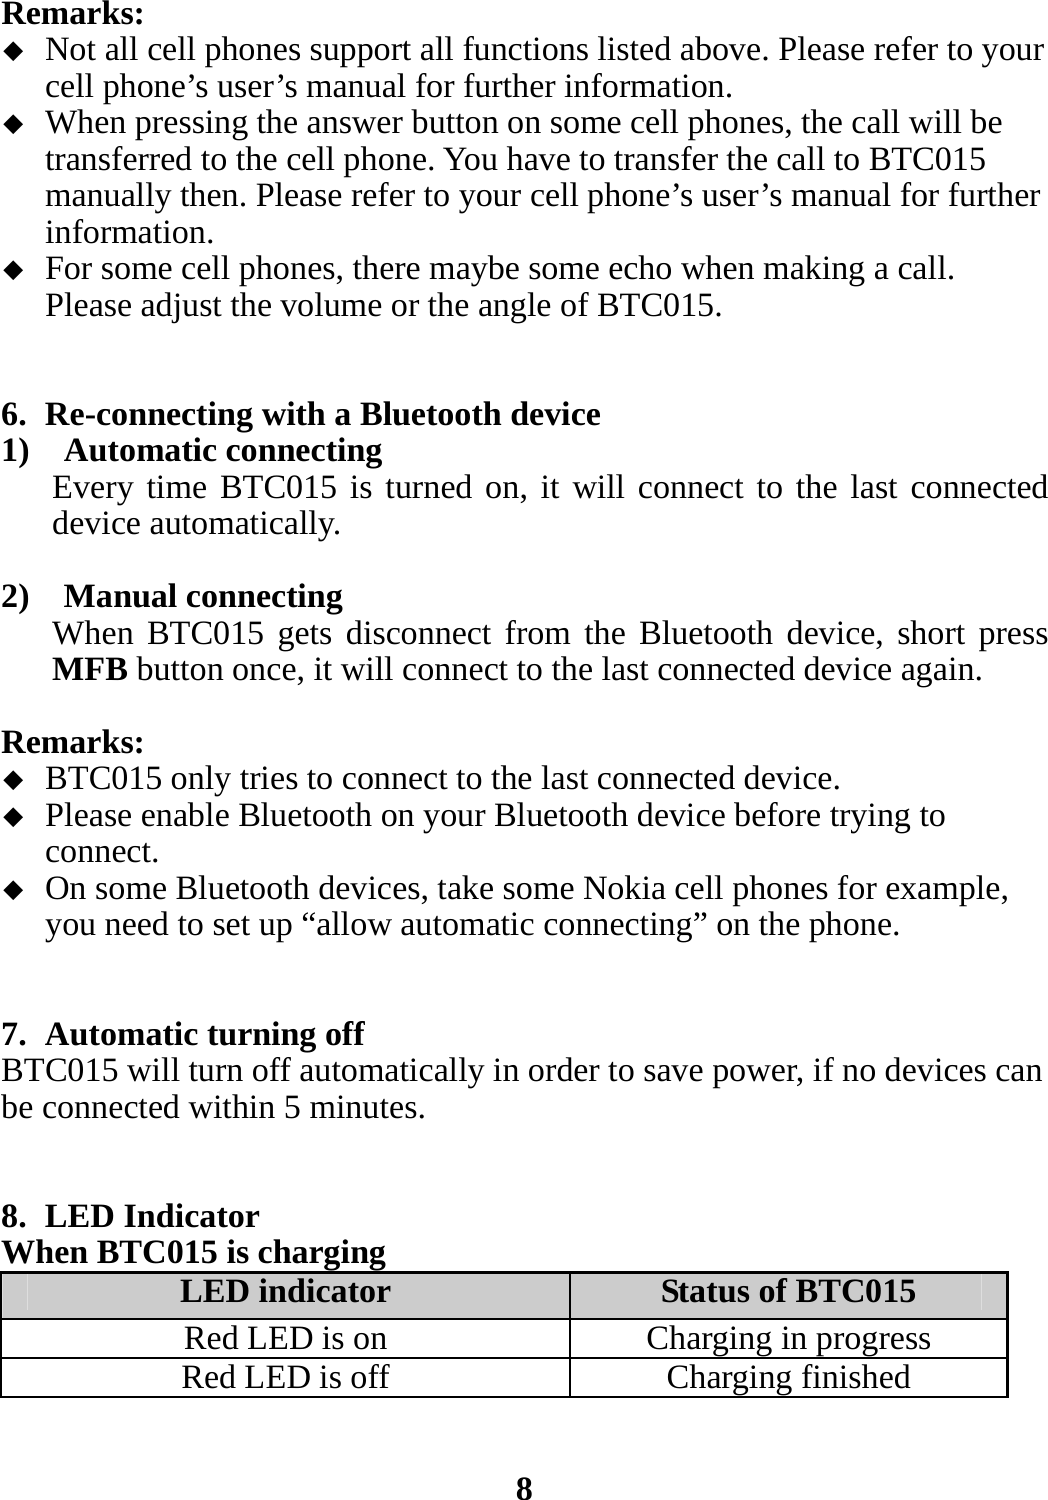 Remarks:  Not all cell phones support all functions listed above. Please refer to your cell phone’s user’s manual for further information.  When pressing the answer button on some cell phones, the call will be transferred to the cell phone. You have to transfer the call to BTC015 manually then. Please refer to your cell phone’s user’s manual for further information.  For some cell phones, there maybe some echo when making a call. Please adjust the volume or the angle of BTC015.   6. Re-connecting with a Bluetooth device 1)  Automatic connecting Every time BTC015 is turned on, it will connect to the last connected device automatically.  2)  Manual connecting When BTC015 gets disconnect from the Bluetooth device, short press MFB button once, it will connect to the last connected device again.  Remarks:  BTC015 only tries to connect to the last connected device.  Please enable Bluetooth on your Bluetooth device before trying to connect.  On some Bluetooth devices, take some Nokia cell phones for example, you need to set up “allow automatic connecting” on the phone.   7. Automatic turning off BTC015 will turn off automatically in order to save power, if no devices can be connected within 5 minutes.   8. LED Indicator When BTC015 is charging LED indicator  Status of BTC015 Red LED is on Charging in progress Red LED is off Charging finished   8 